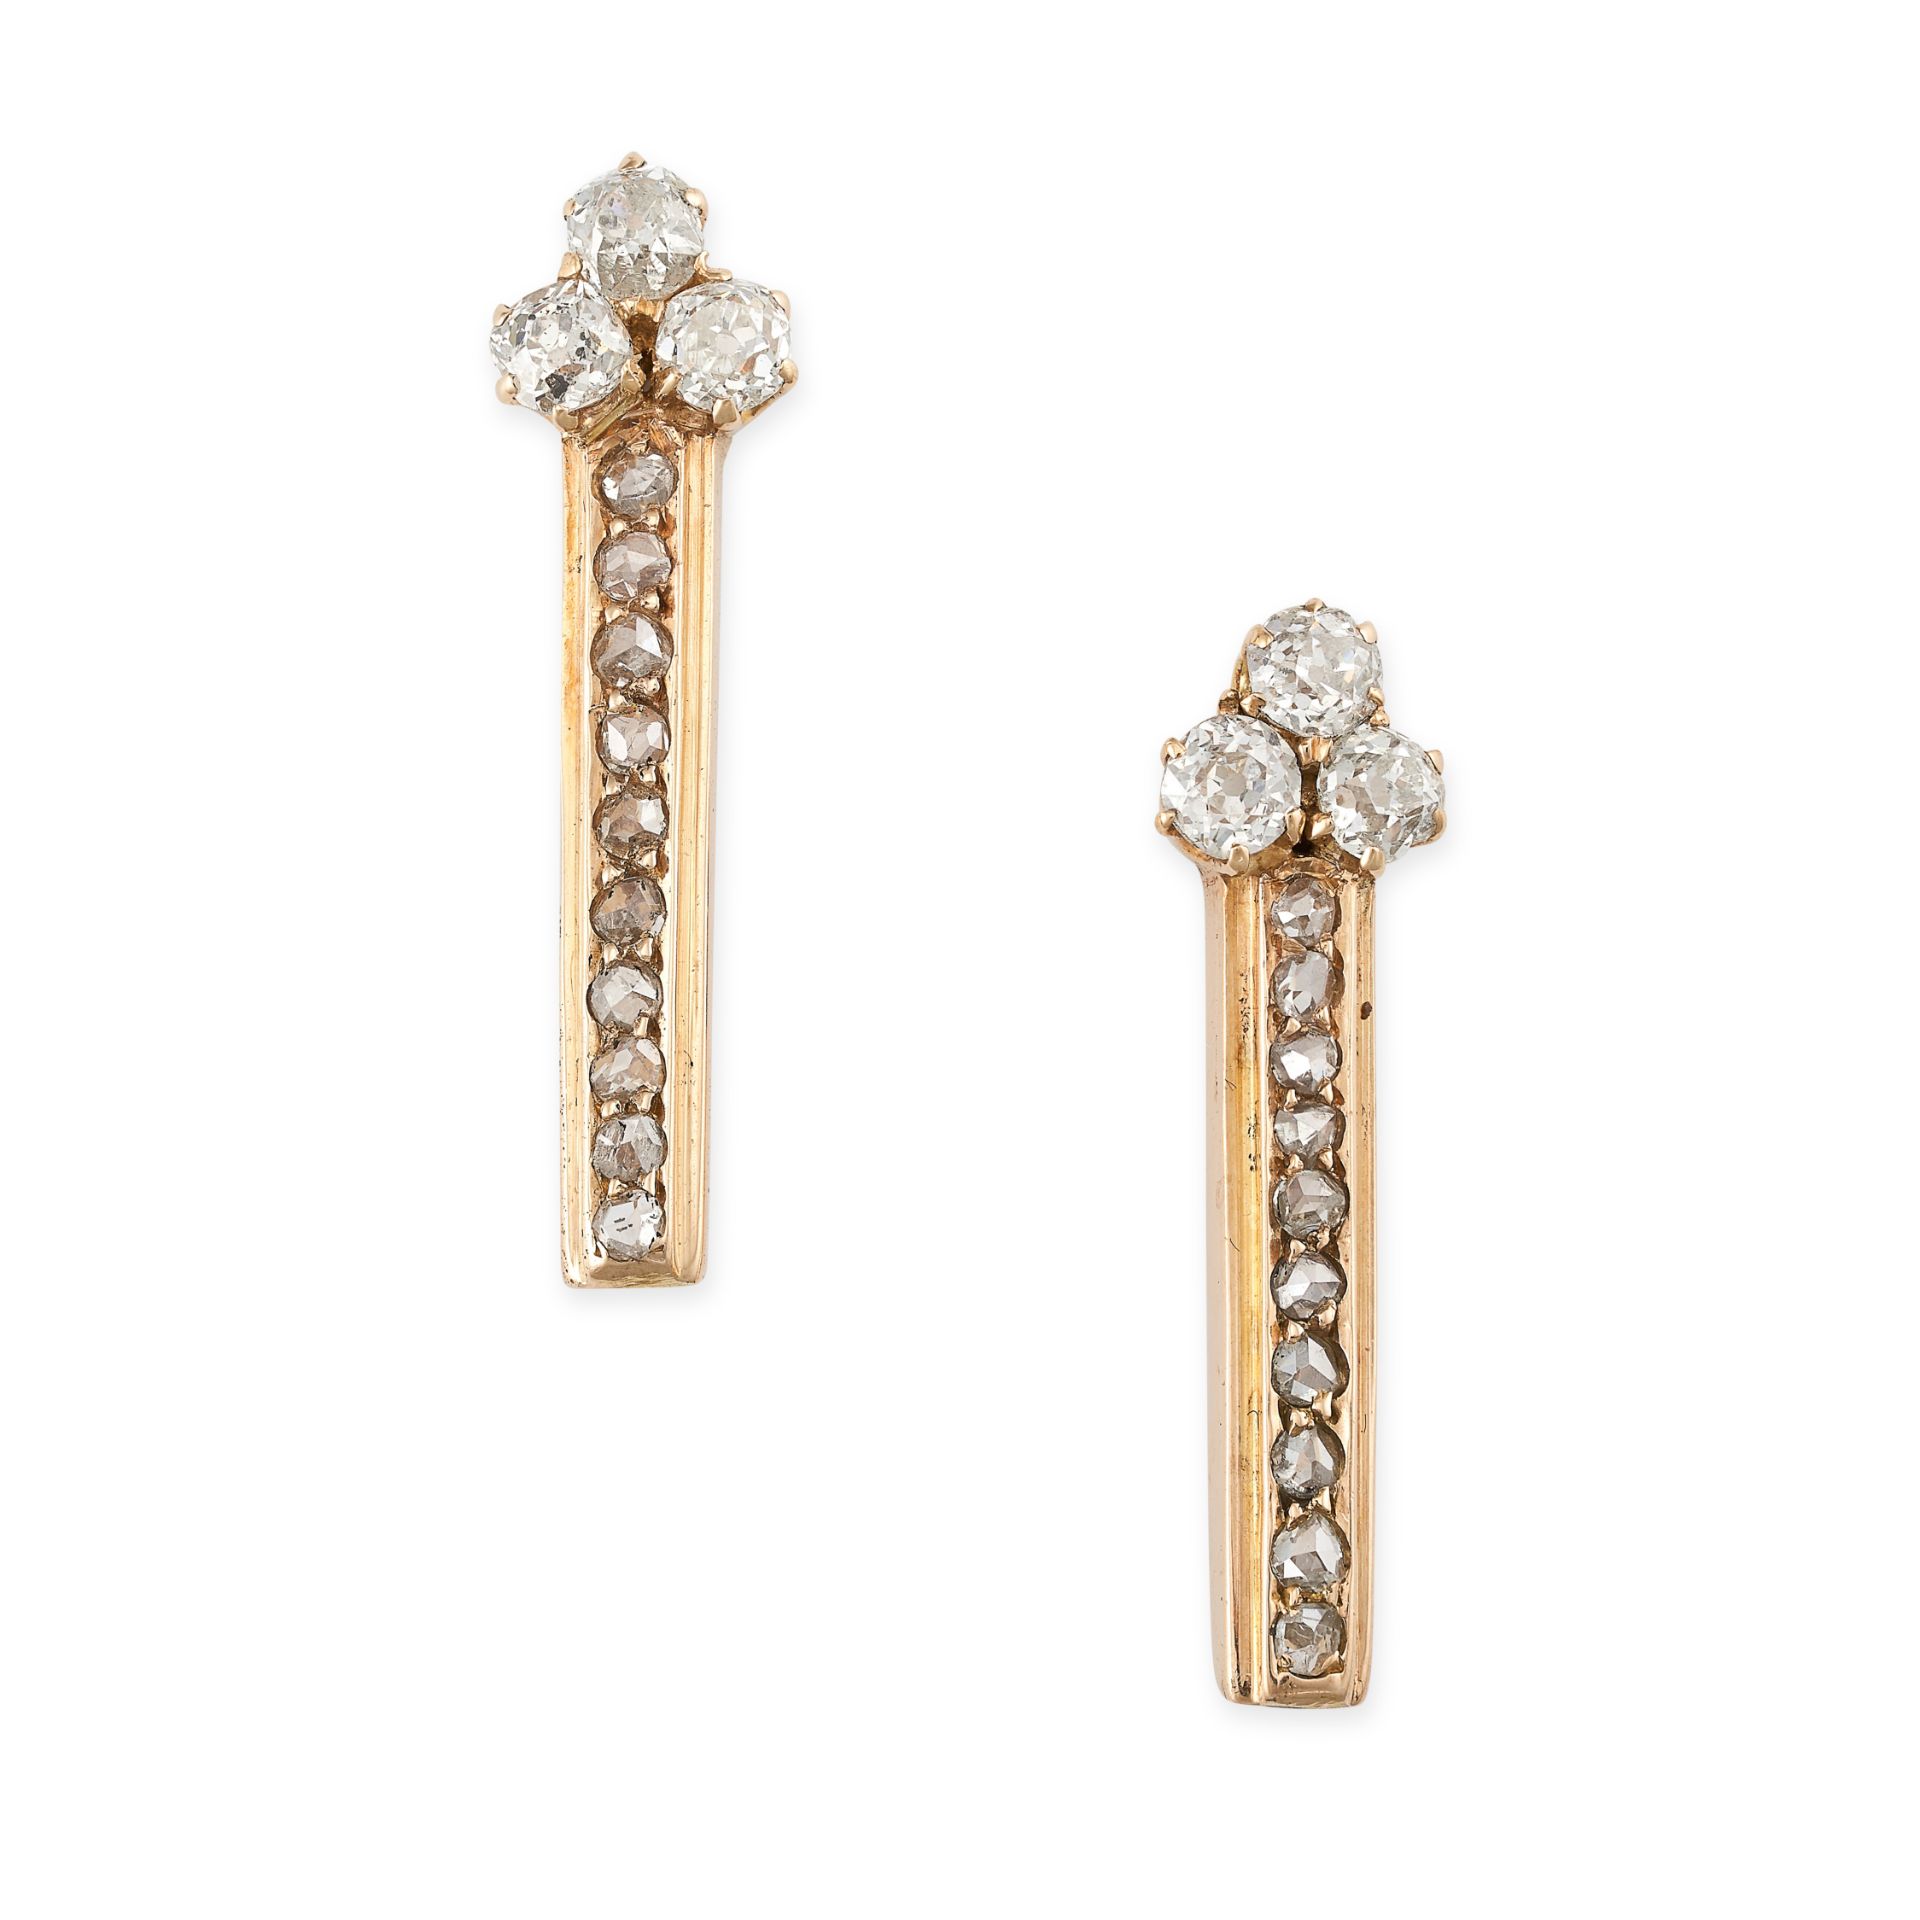 A PAIR OF DIAMOND DROP EARRINGS in 18ct yellow gold, each set with a trio of old cut diamonds sus...